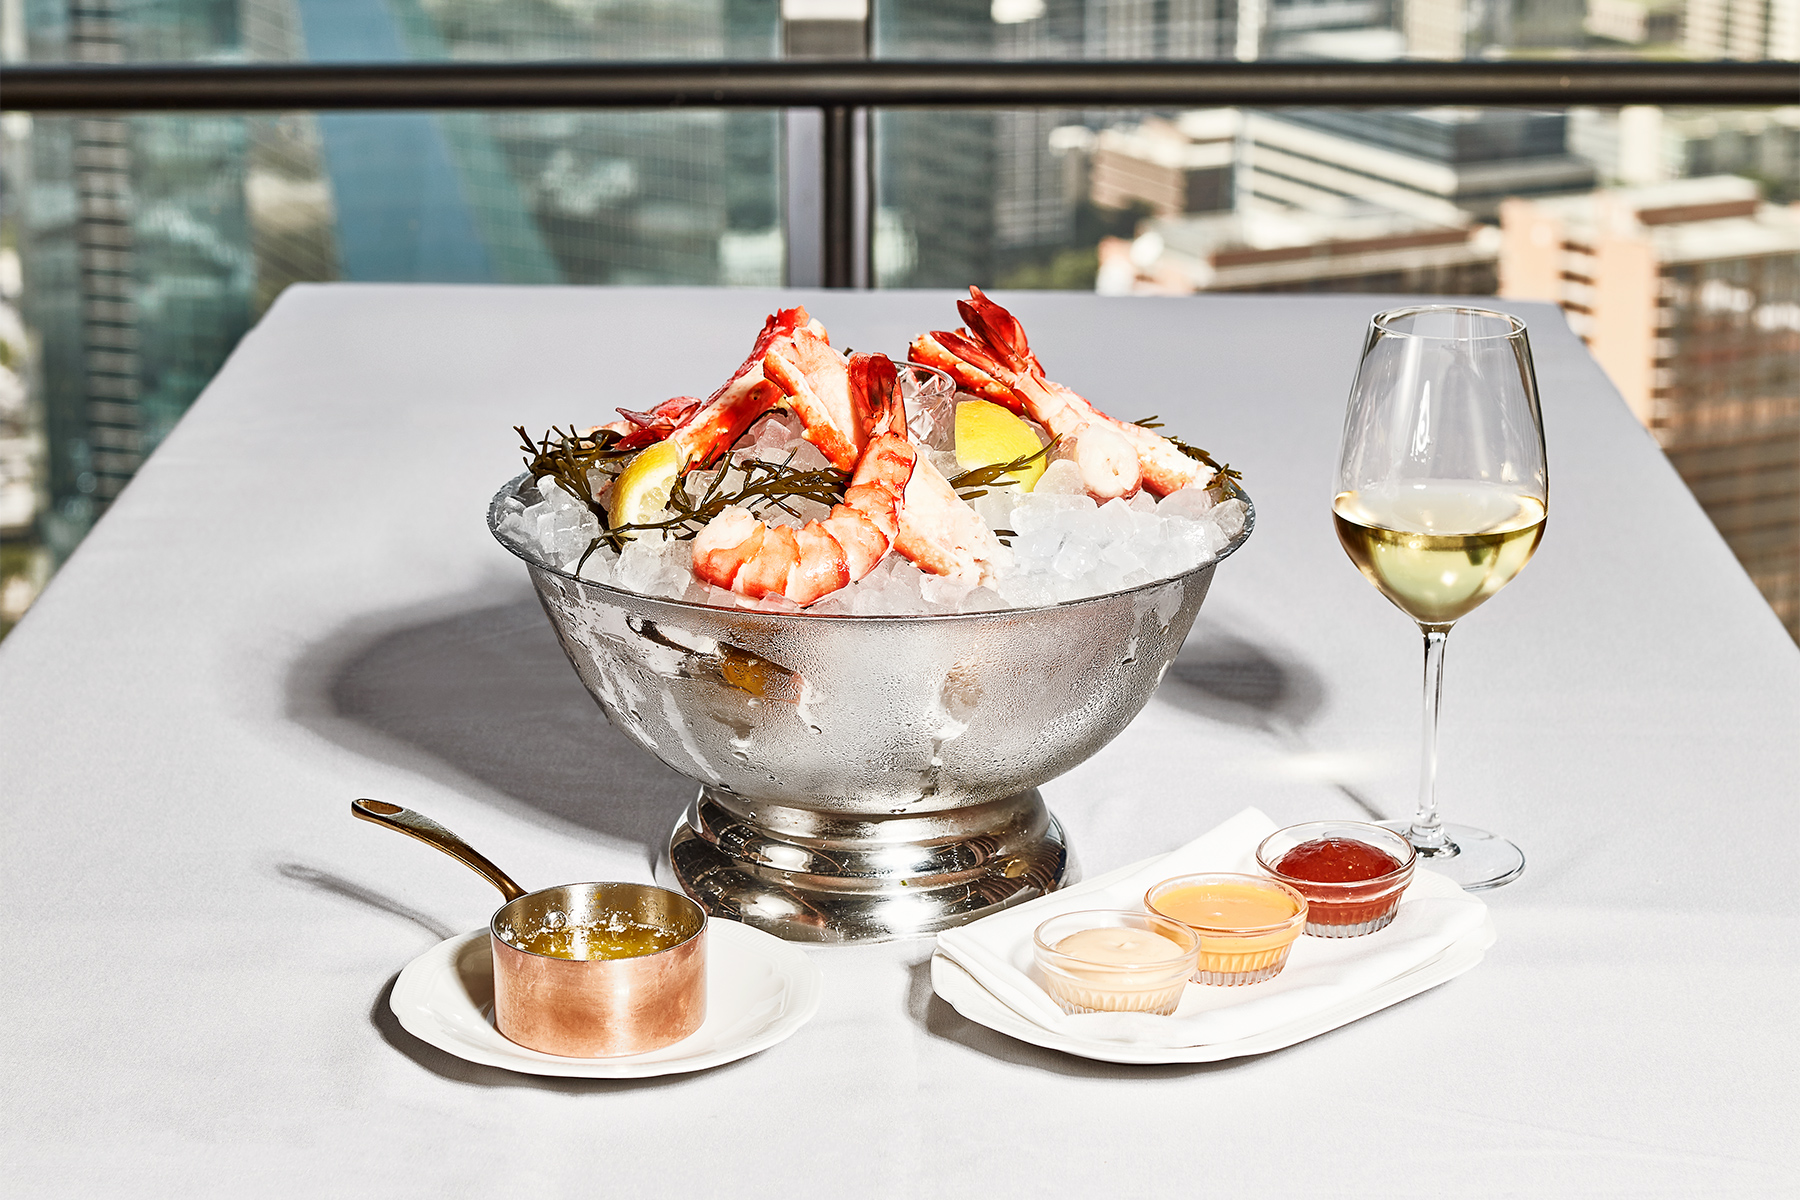 Monarch, The National’s 49th-Floor Restaurant, Offers Opulence Without Limits